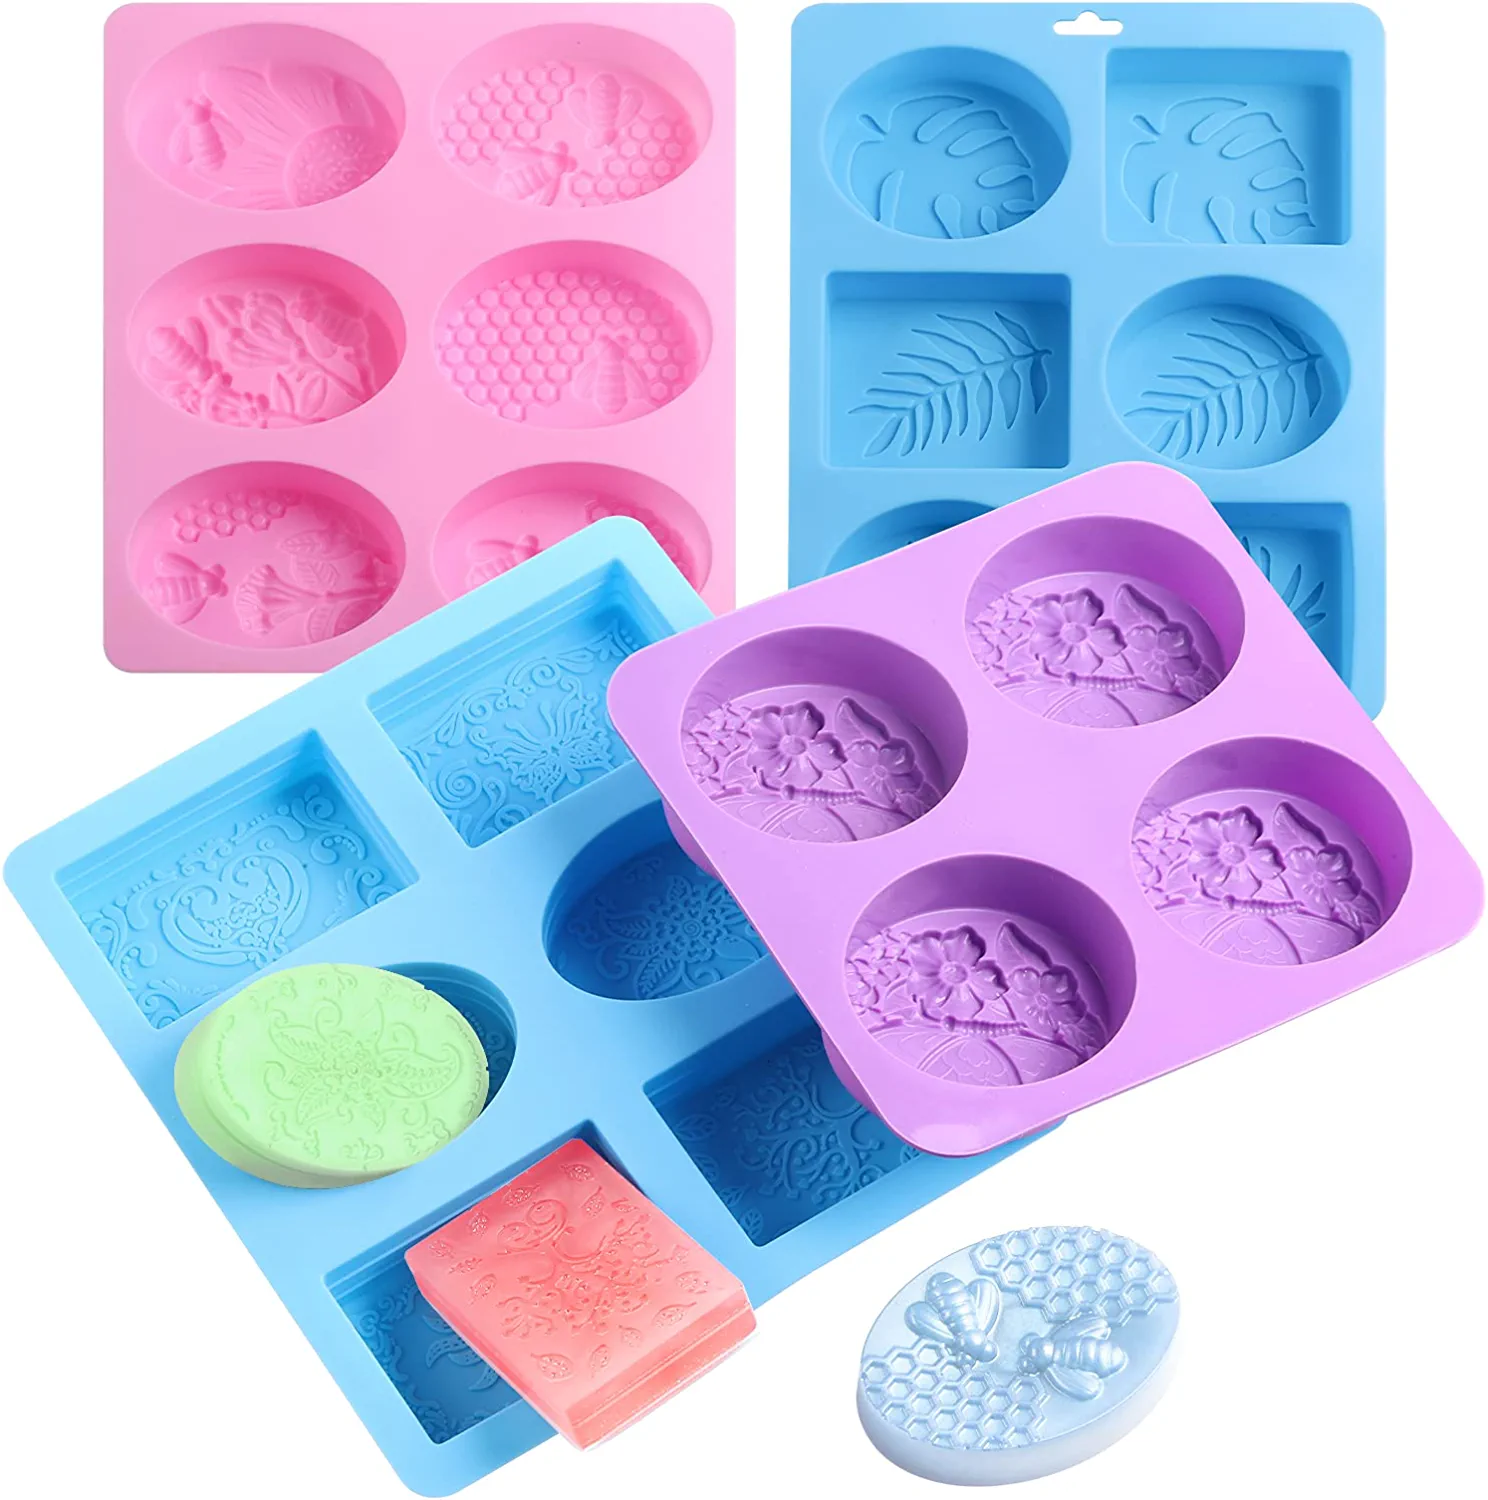 Round Soap Molds, Silicone Soap Molds For Soap Making 12Cavity Cylinder  Silicone Mold For Lotion Bars, Bath Bombs, Shower Steamer, Shower Tablets,  Bee